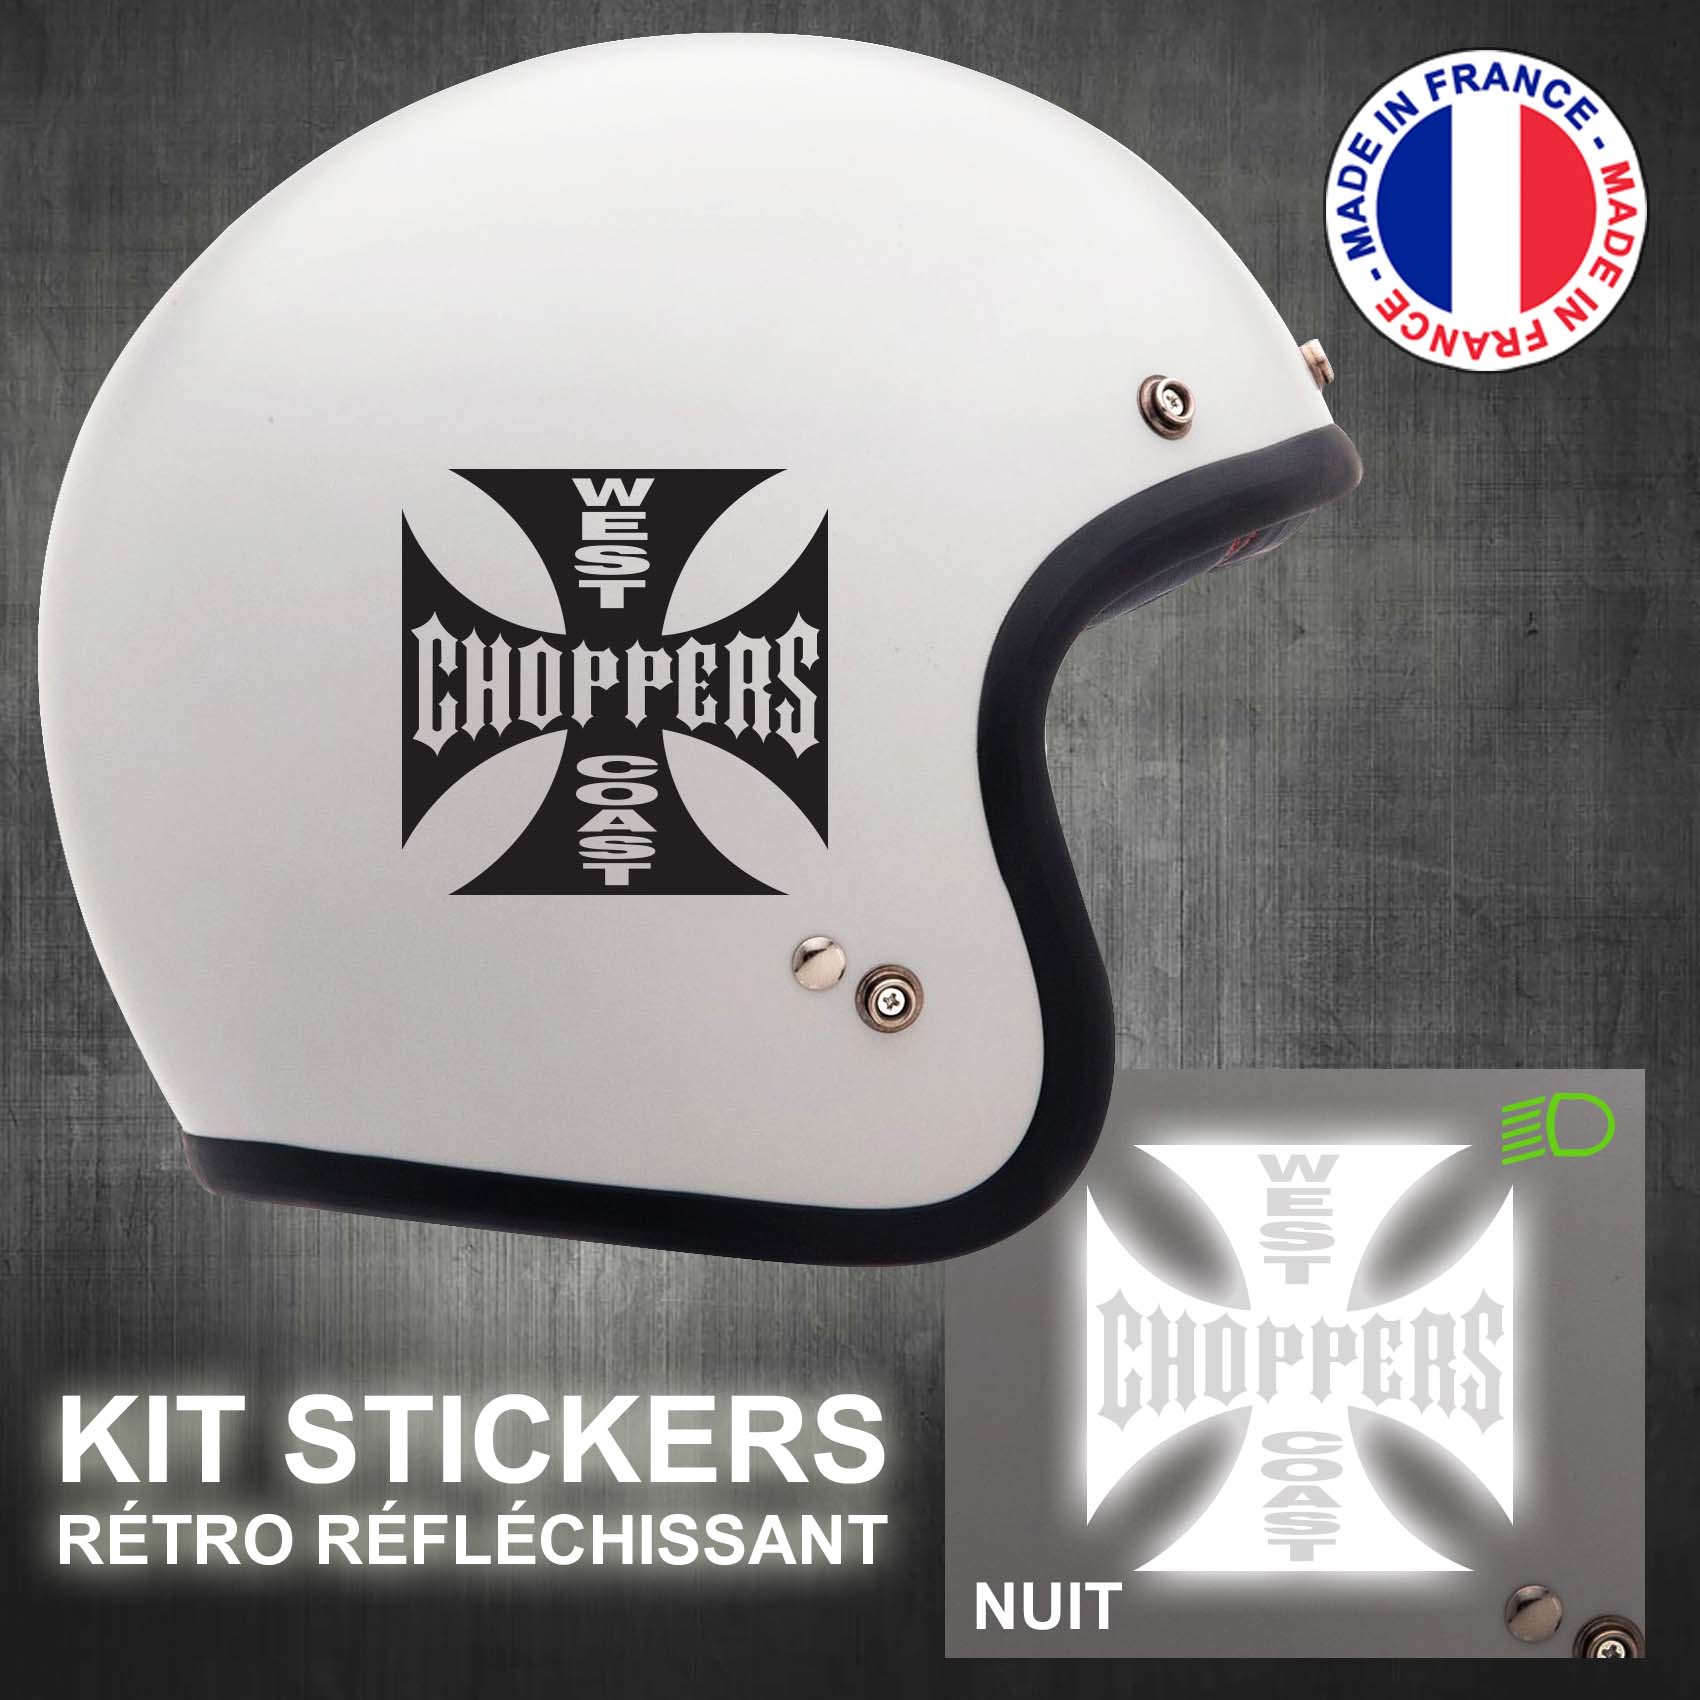 stickers-casque-moto-west-coast-choppers-ref1-retro-reflechissant-autocollant-blanc-moto-velo-tuning-racing-route-sticker-casques-adhesif-scooter-nuit-securite-decals-personnalise-personnalisable-